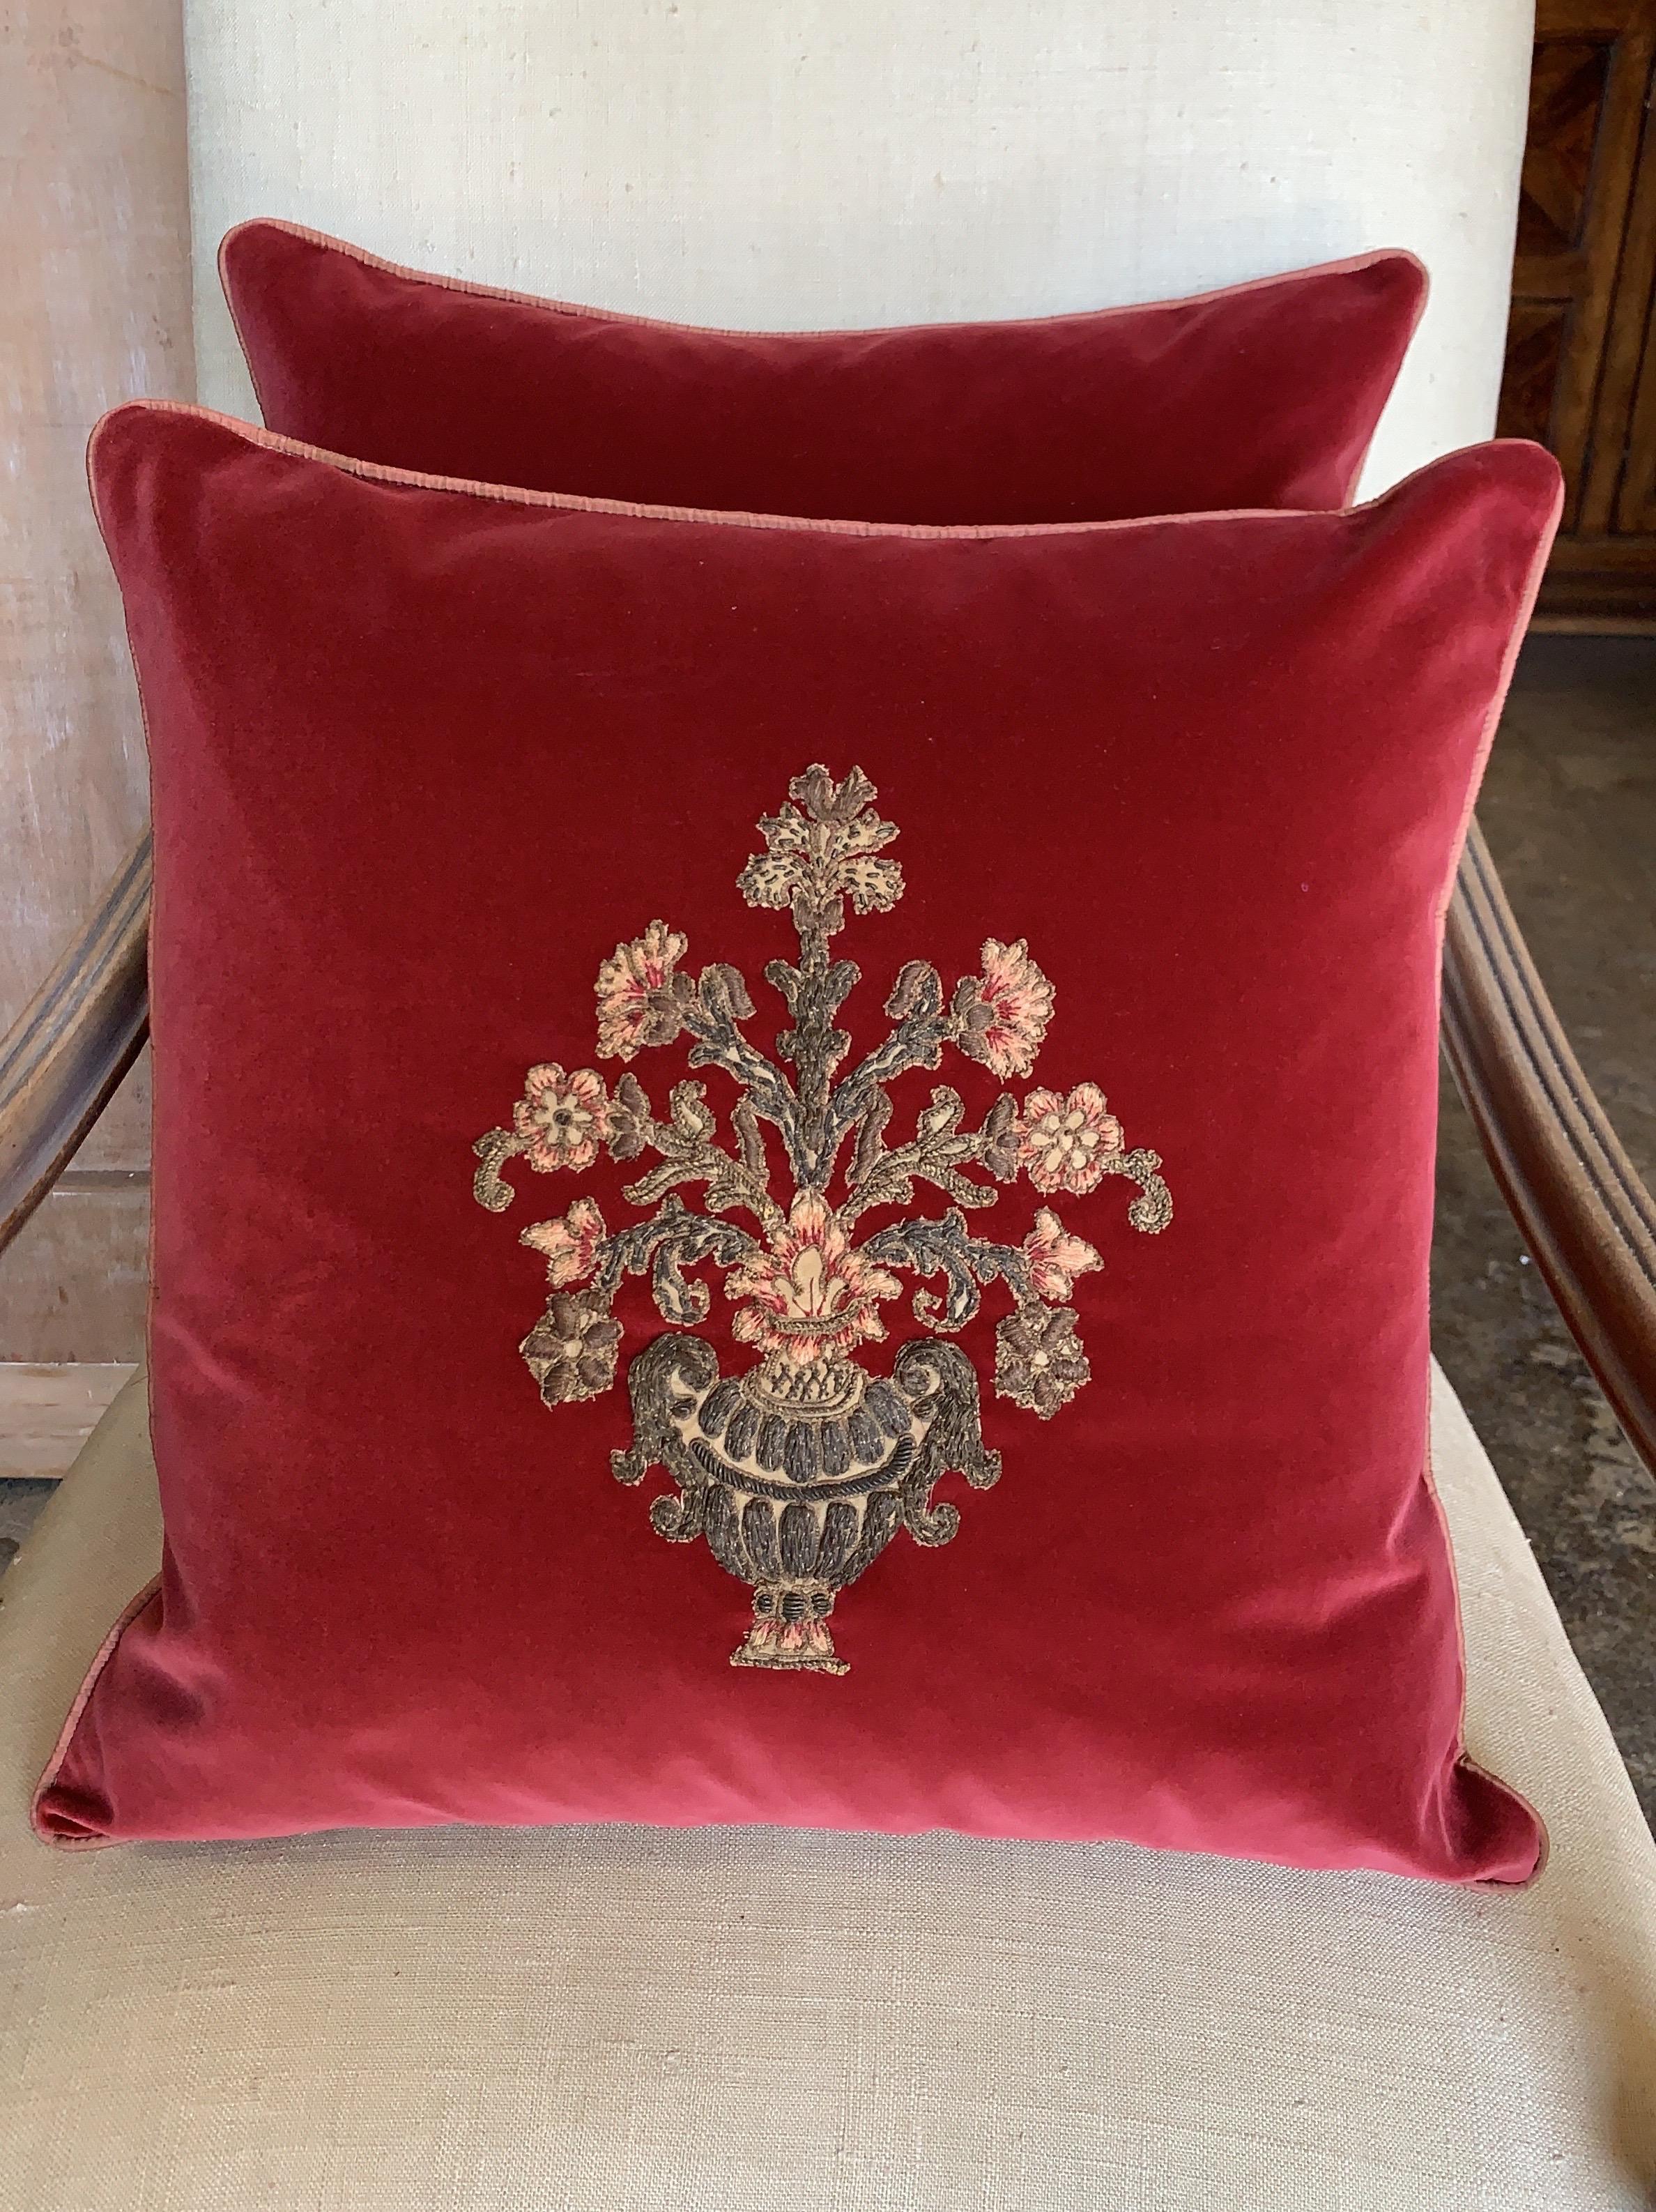 Pair of custom pillows with 19th century metallic and chenille floral appliques sewn on contemporary vibrant colored dark pink velvet background fronts and soft colored pink silk backs. Self cord detail. Down and feather inserts. 20” x 20”.